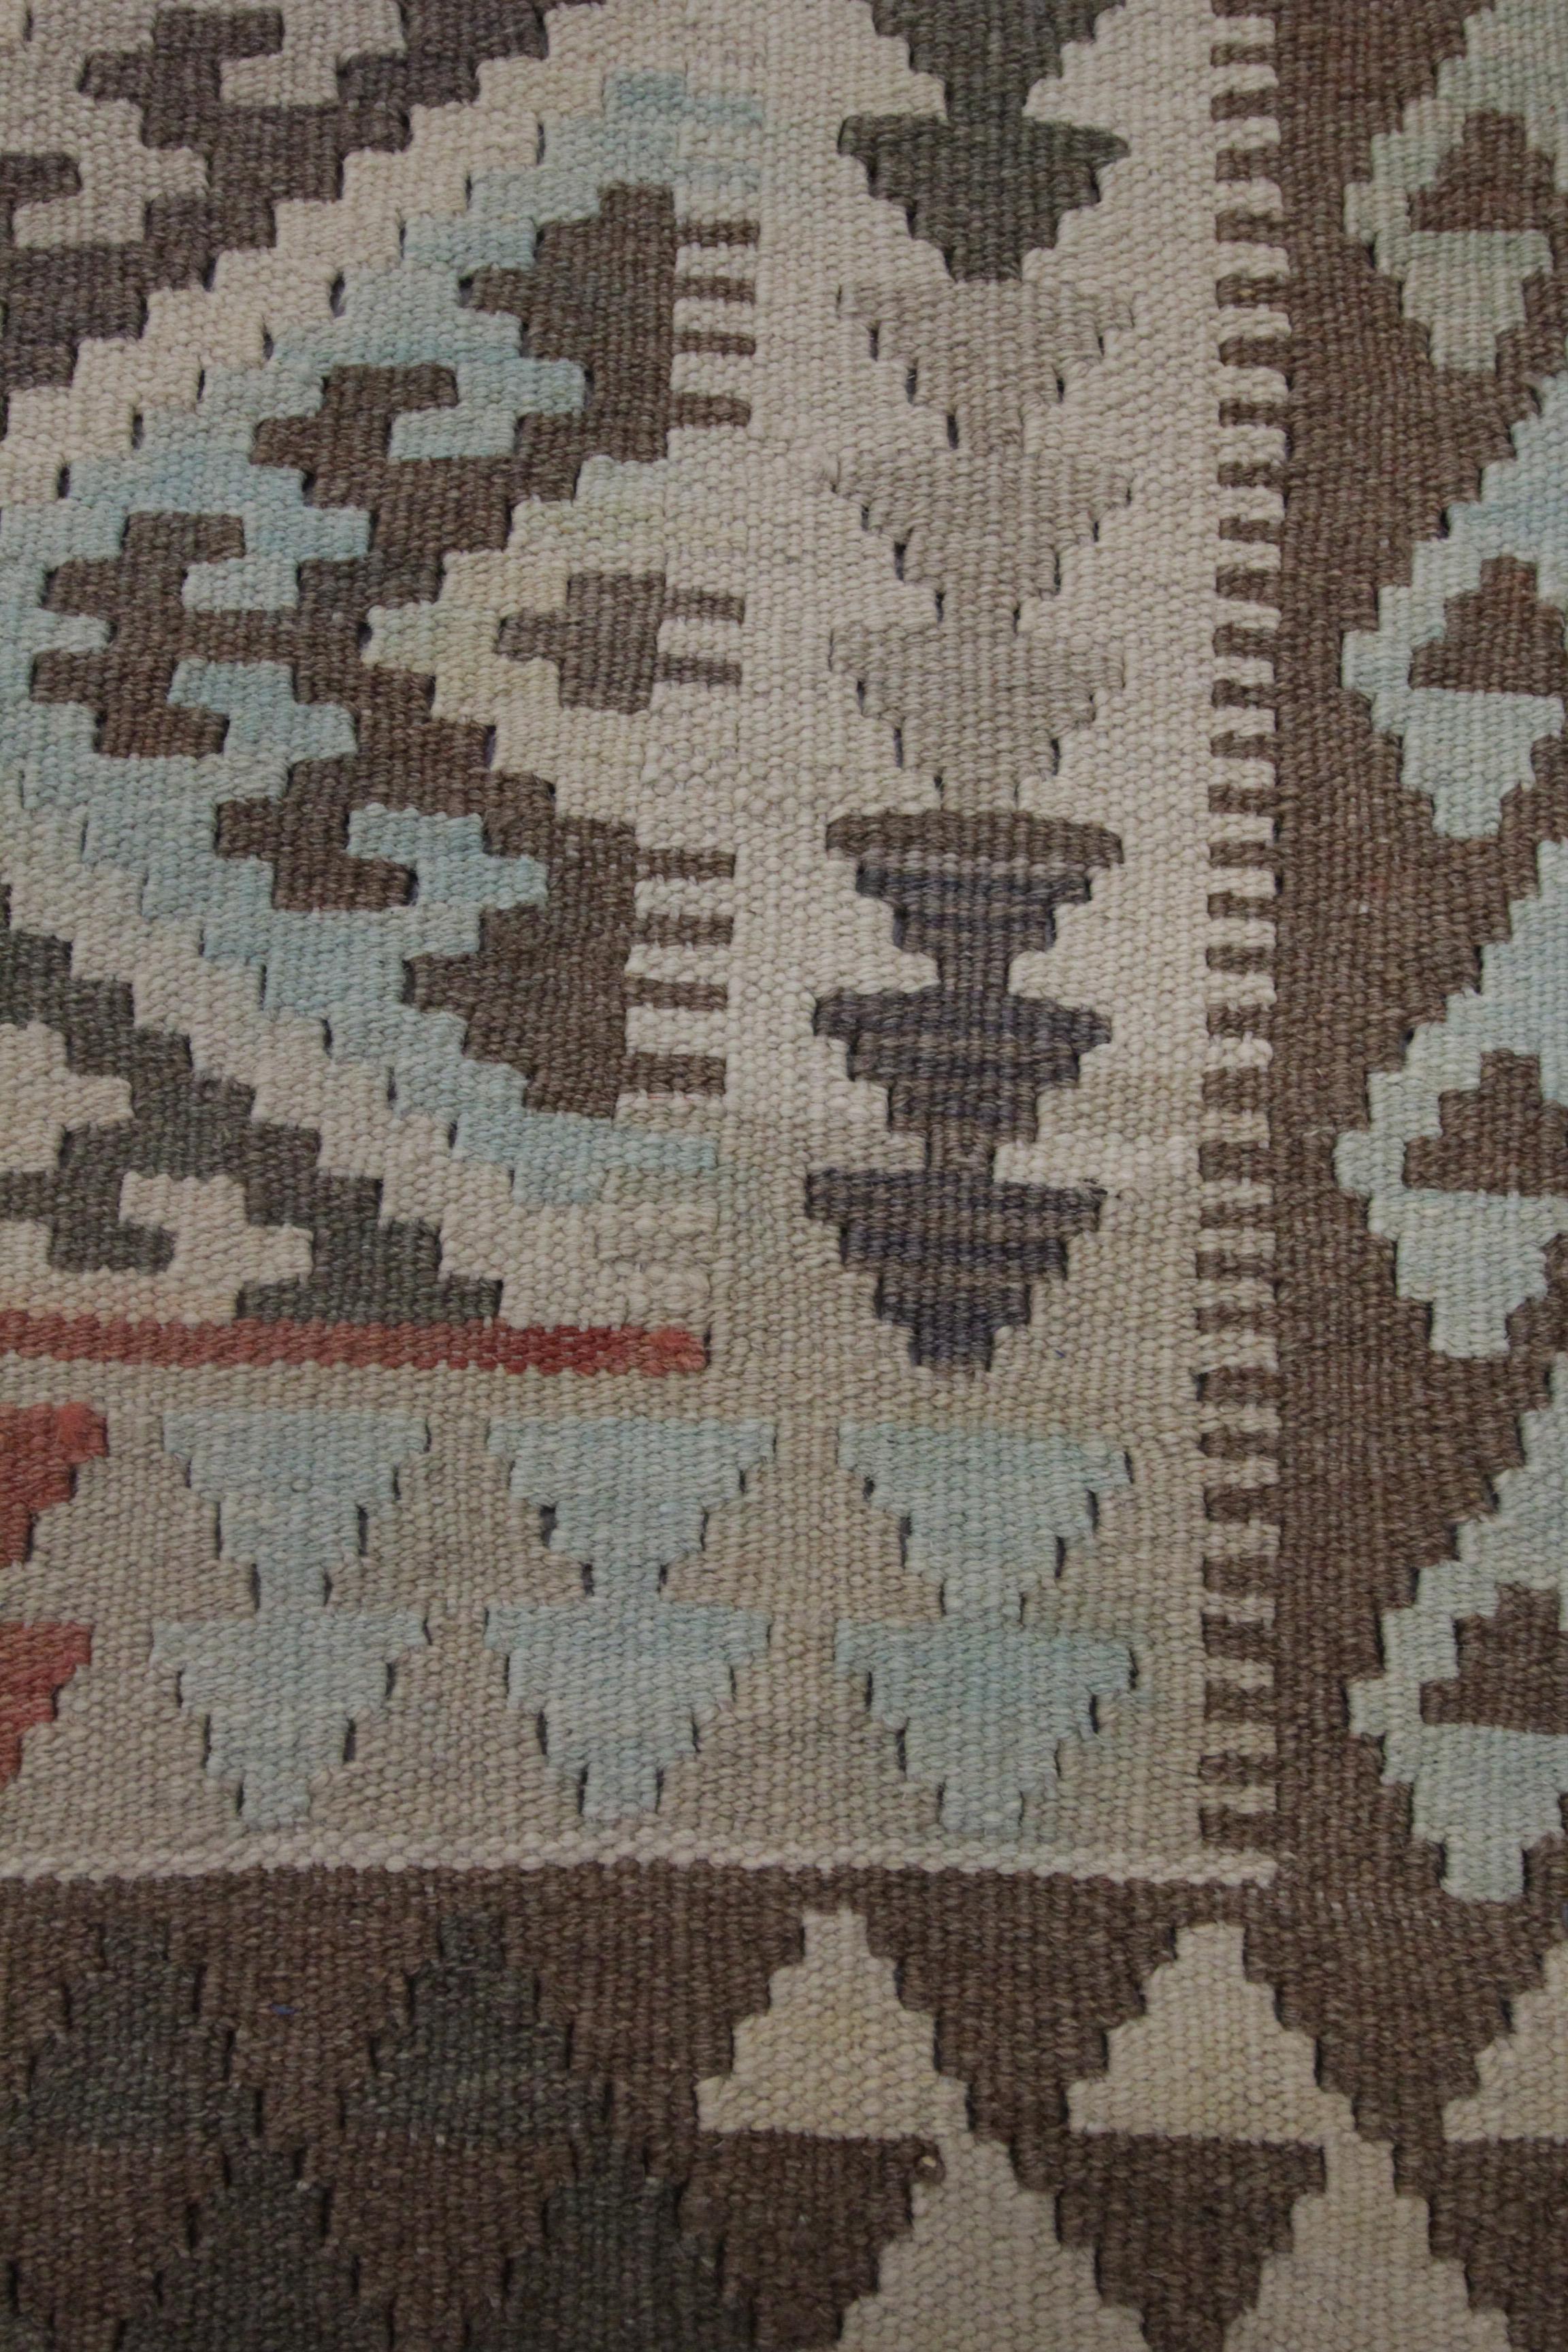 This bold traditional wool Kilim rug is a handwoven Afghan Kilim constructed in the early 21st century, circa 2010-15. The design features a repeating motif pattern made up of hook medallions in blue, beige, and brown accents. A layered border then